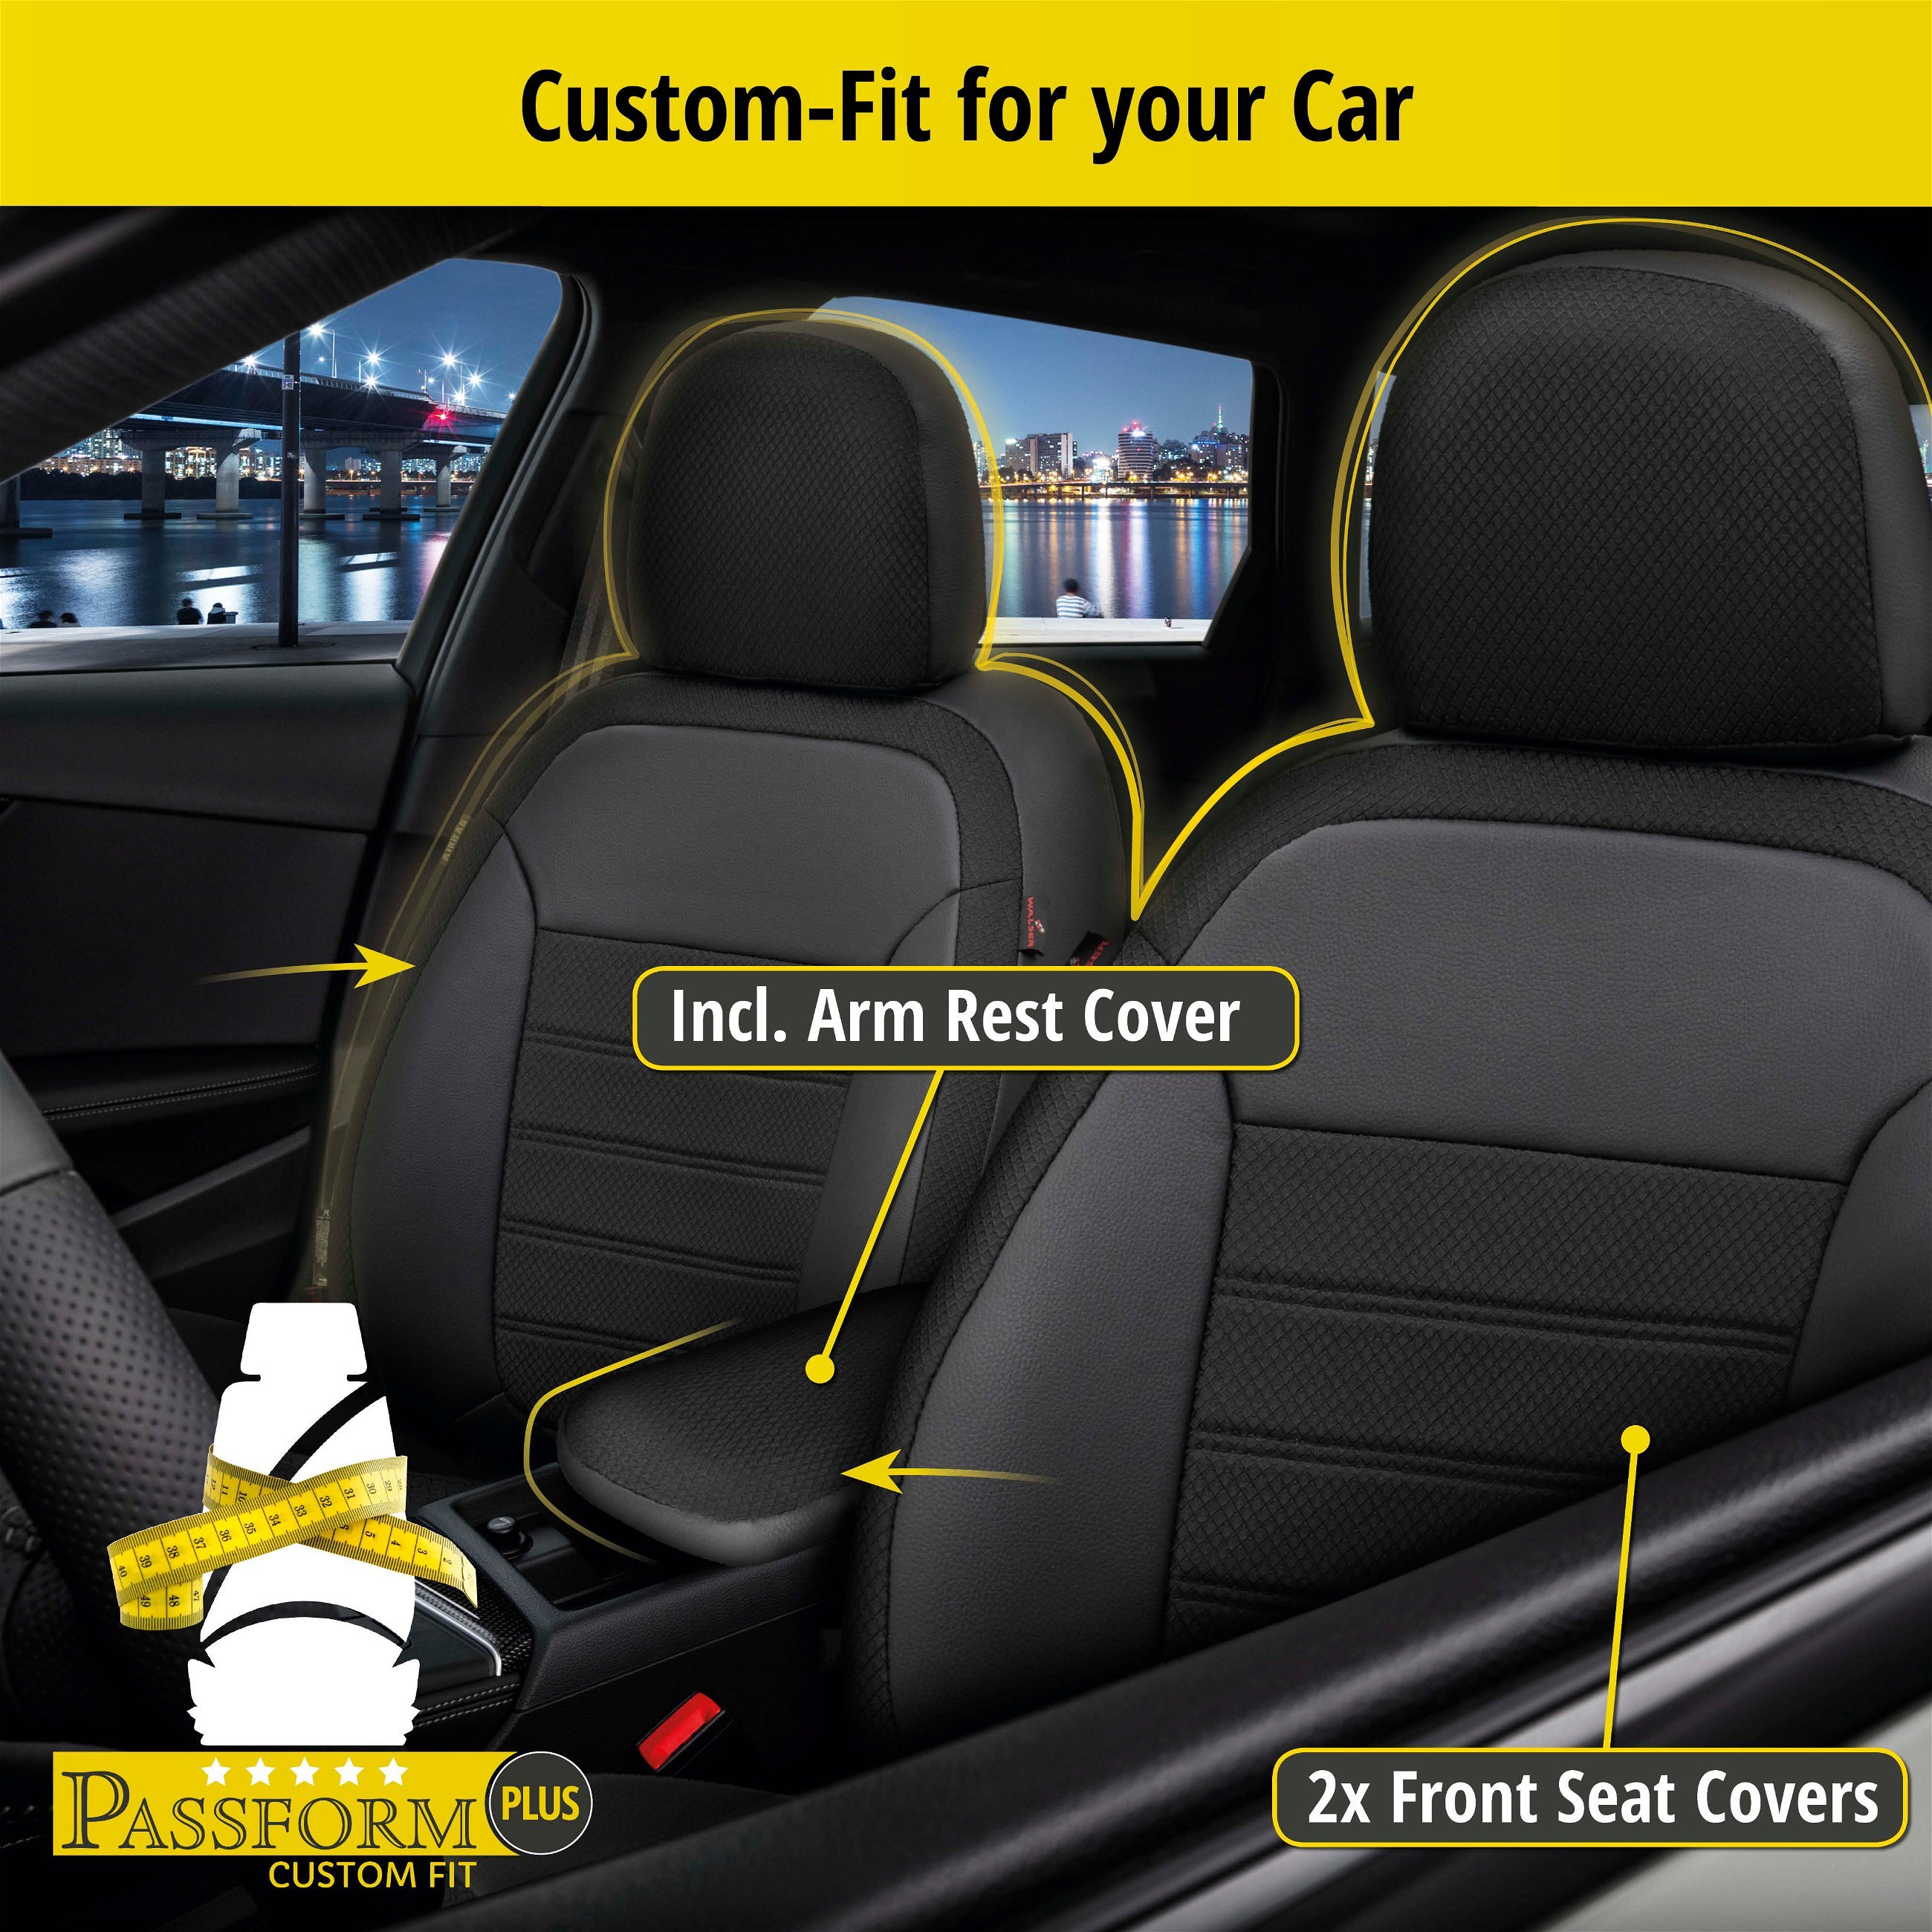 Seat Cover Aversa for VW Passat Variant (3G5, CB5) 08/2014-Today, 2 seat covers for normal seats